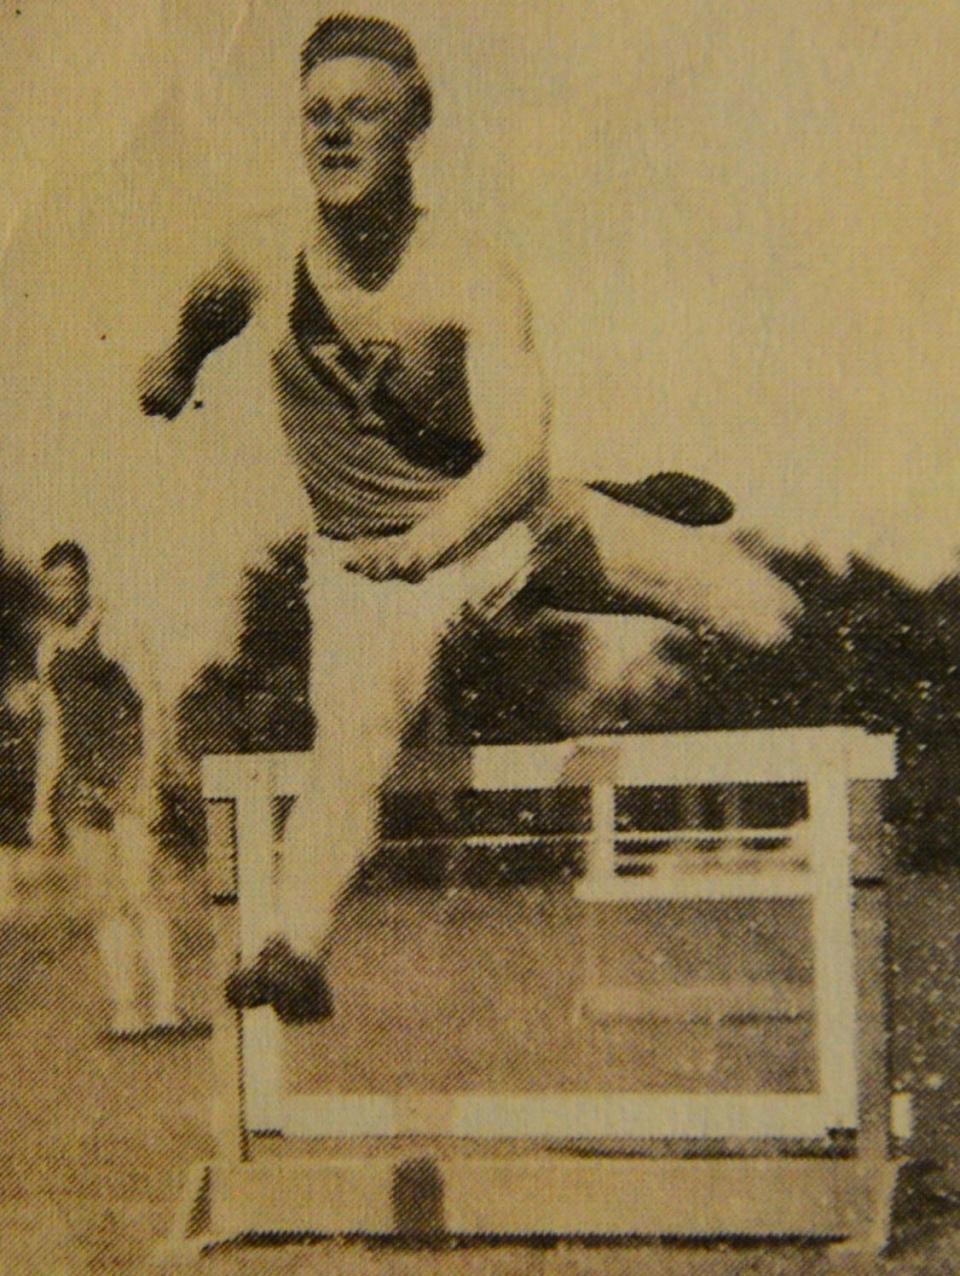 Dave Munro won a state championship in the high jump in 1926 for Monroe High with what was at the time a state-record leap of 5-9. He is being inducted into the Monroe High Athletic Hall of Fame Friday.